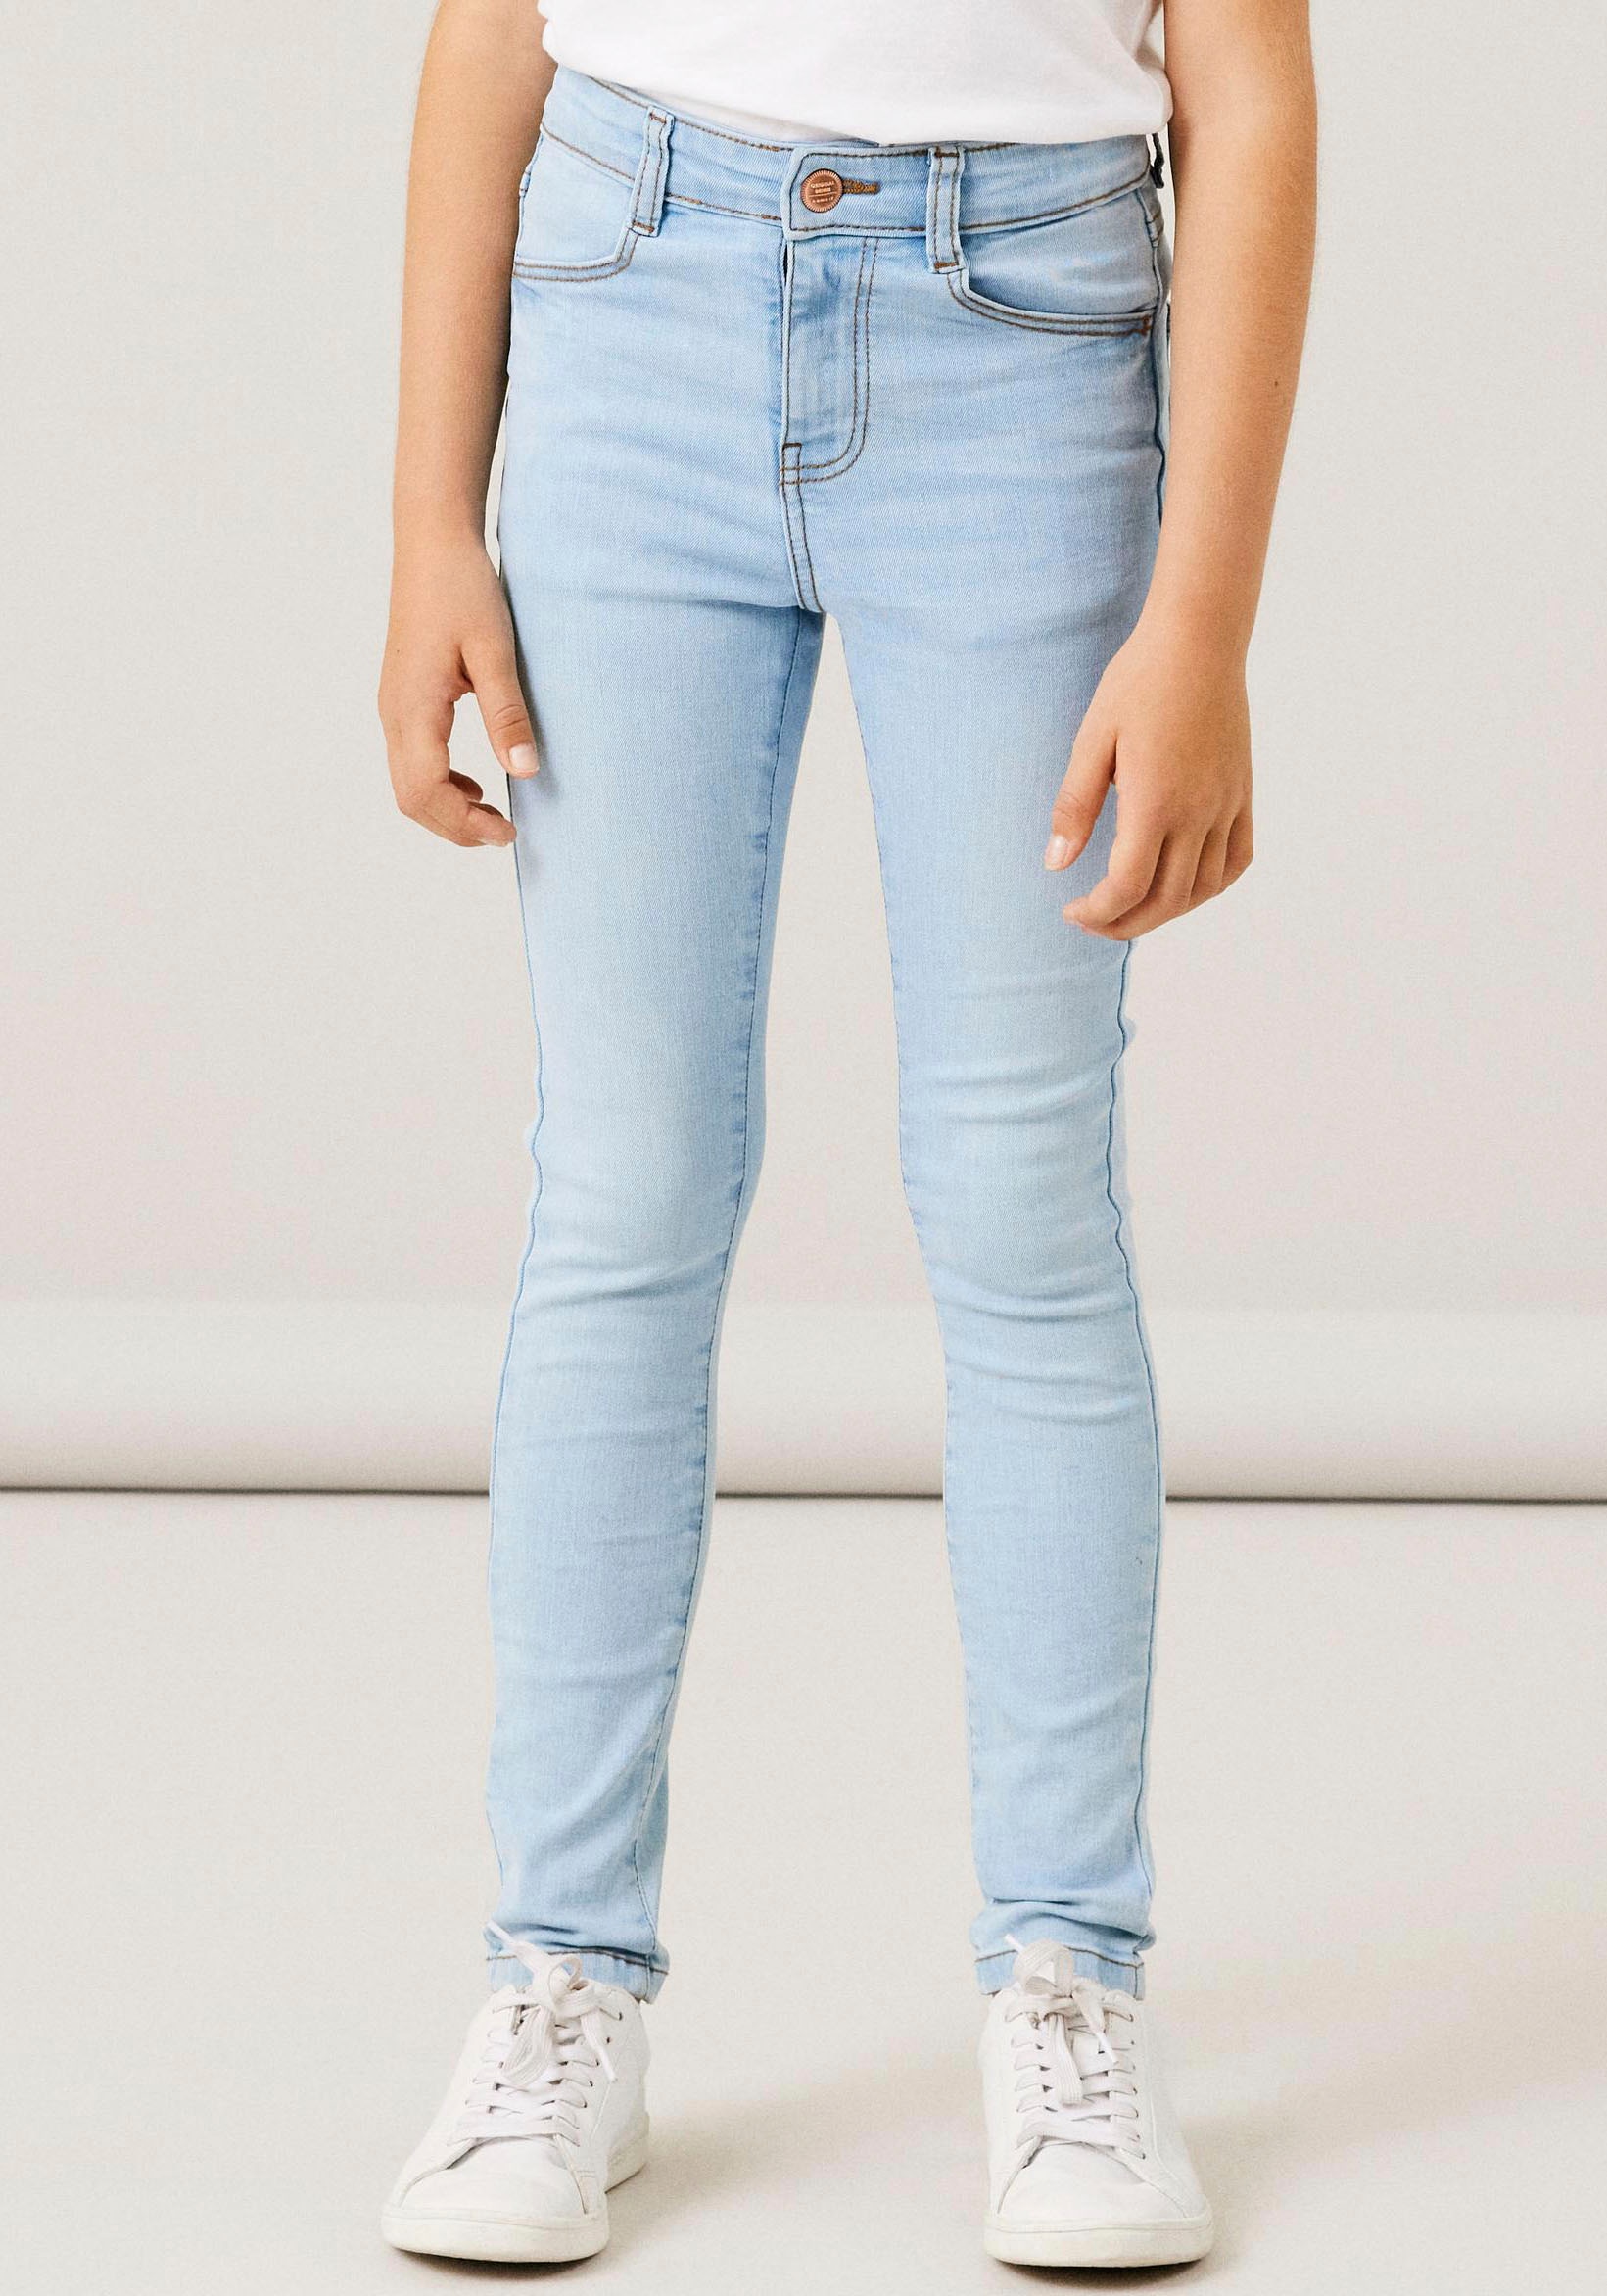 »NKFPOLLY Skinny-fit-Jeans mit SKINNY JEANS Name NOOS«, Stretch 1180-ST kaufen OTTO bei It HW